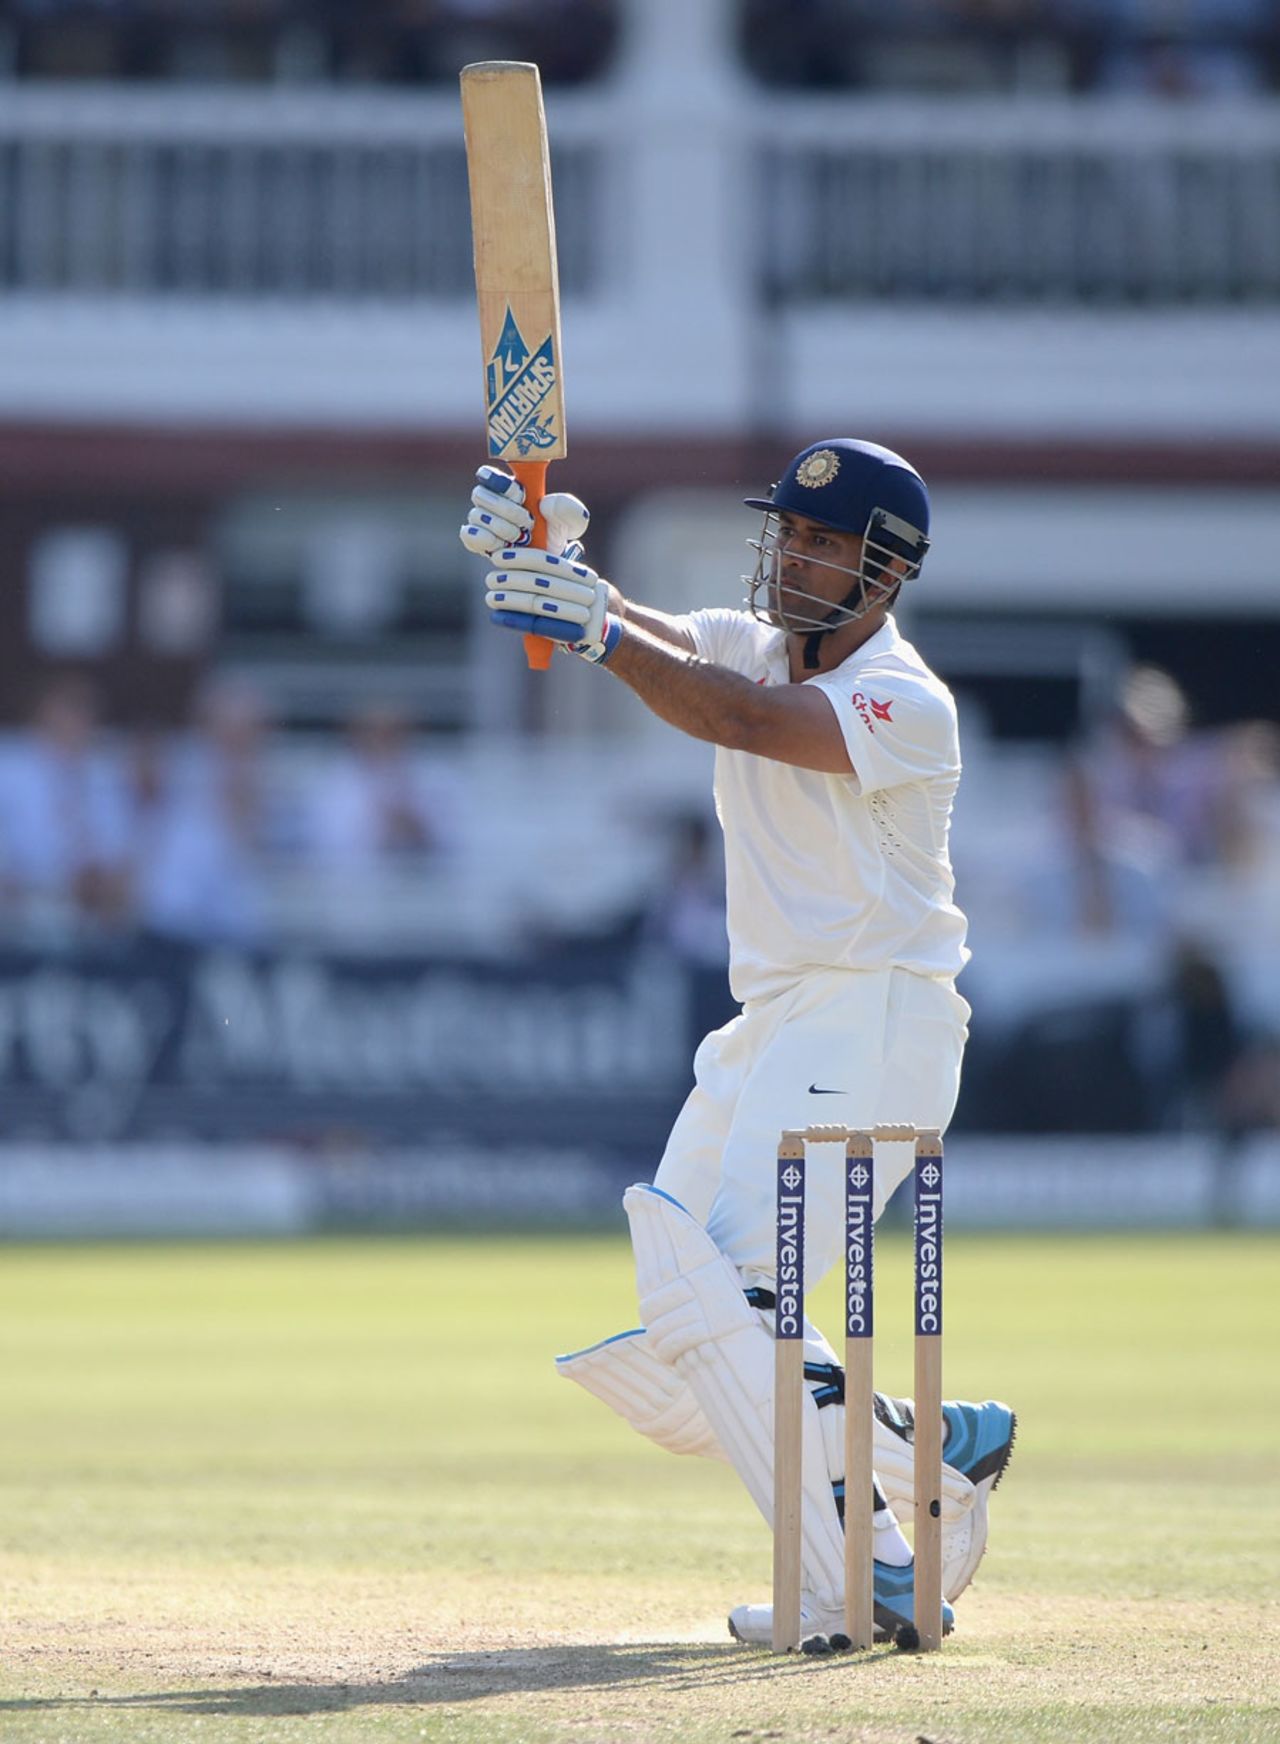 MS Dhoni sets up for an unorthodox shot , England v India, 2nd Investec Test, Lord's, 3rd day, July 19, 2014